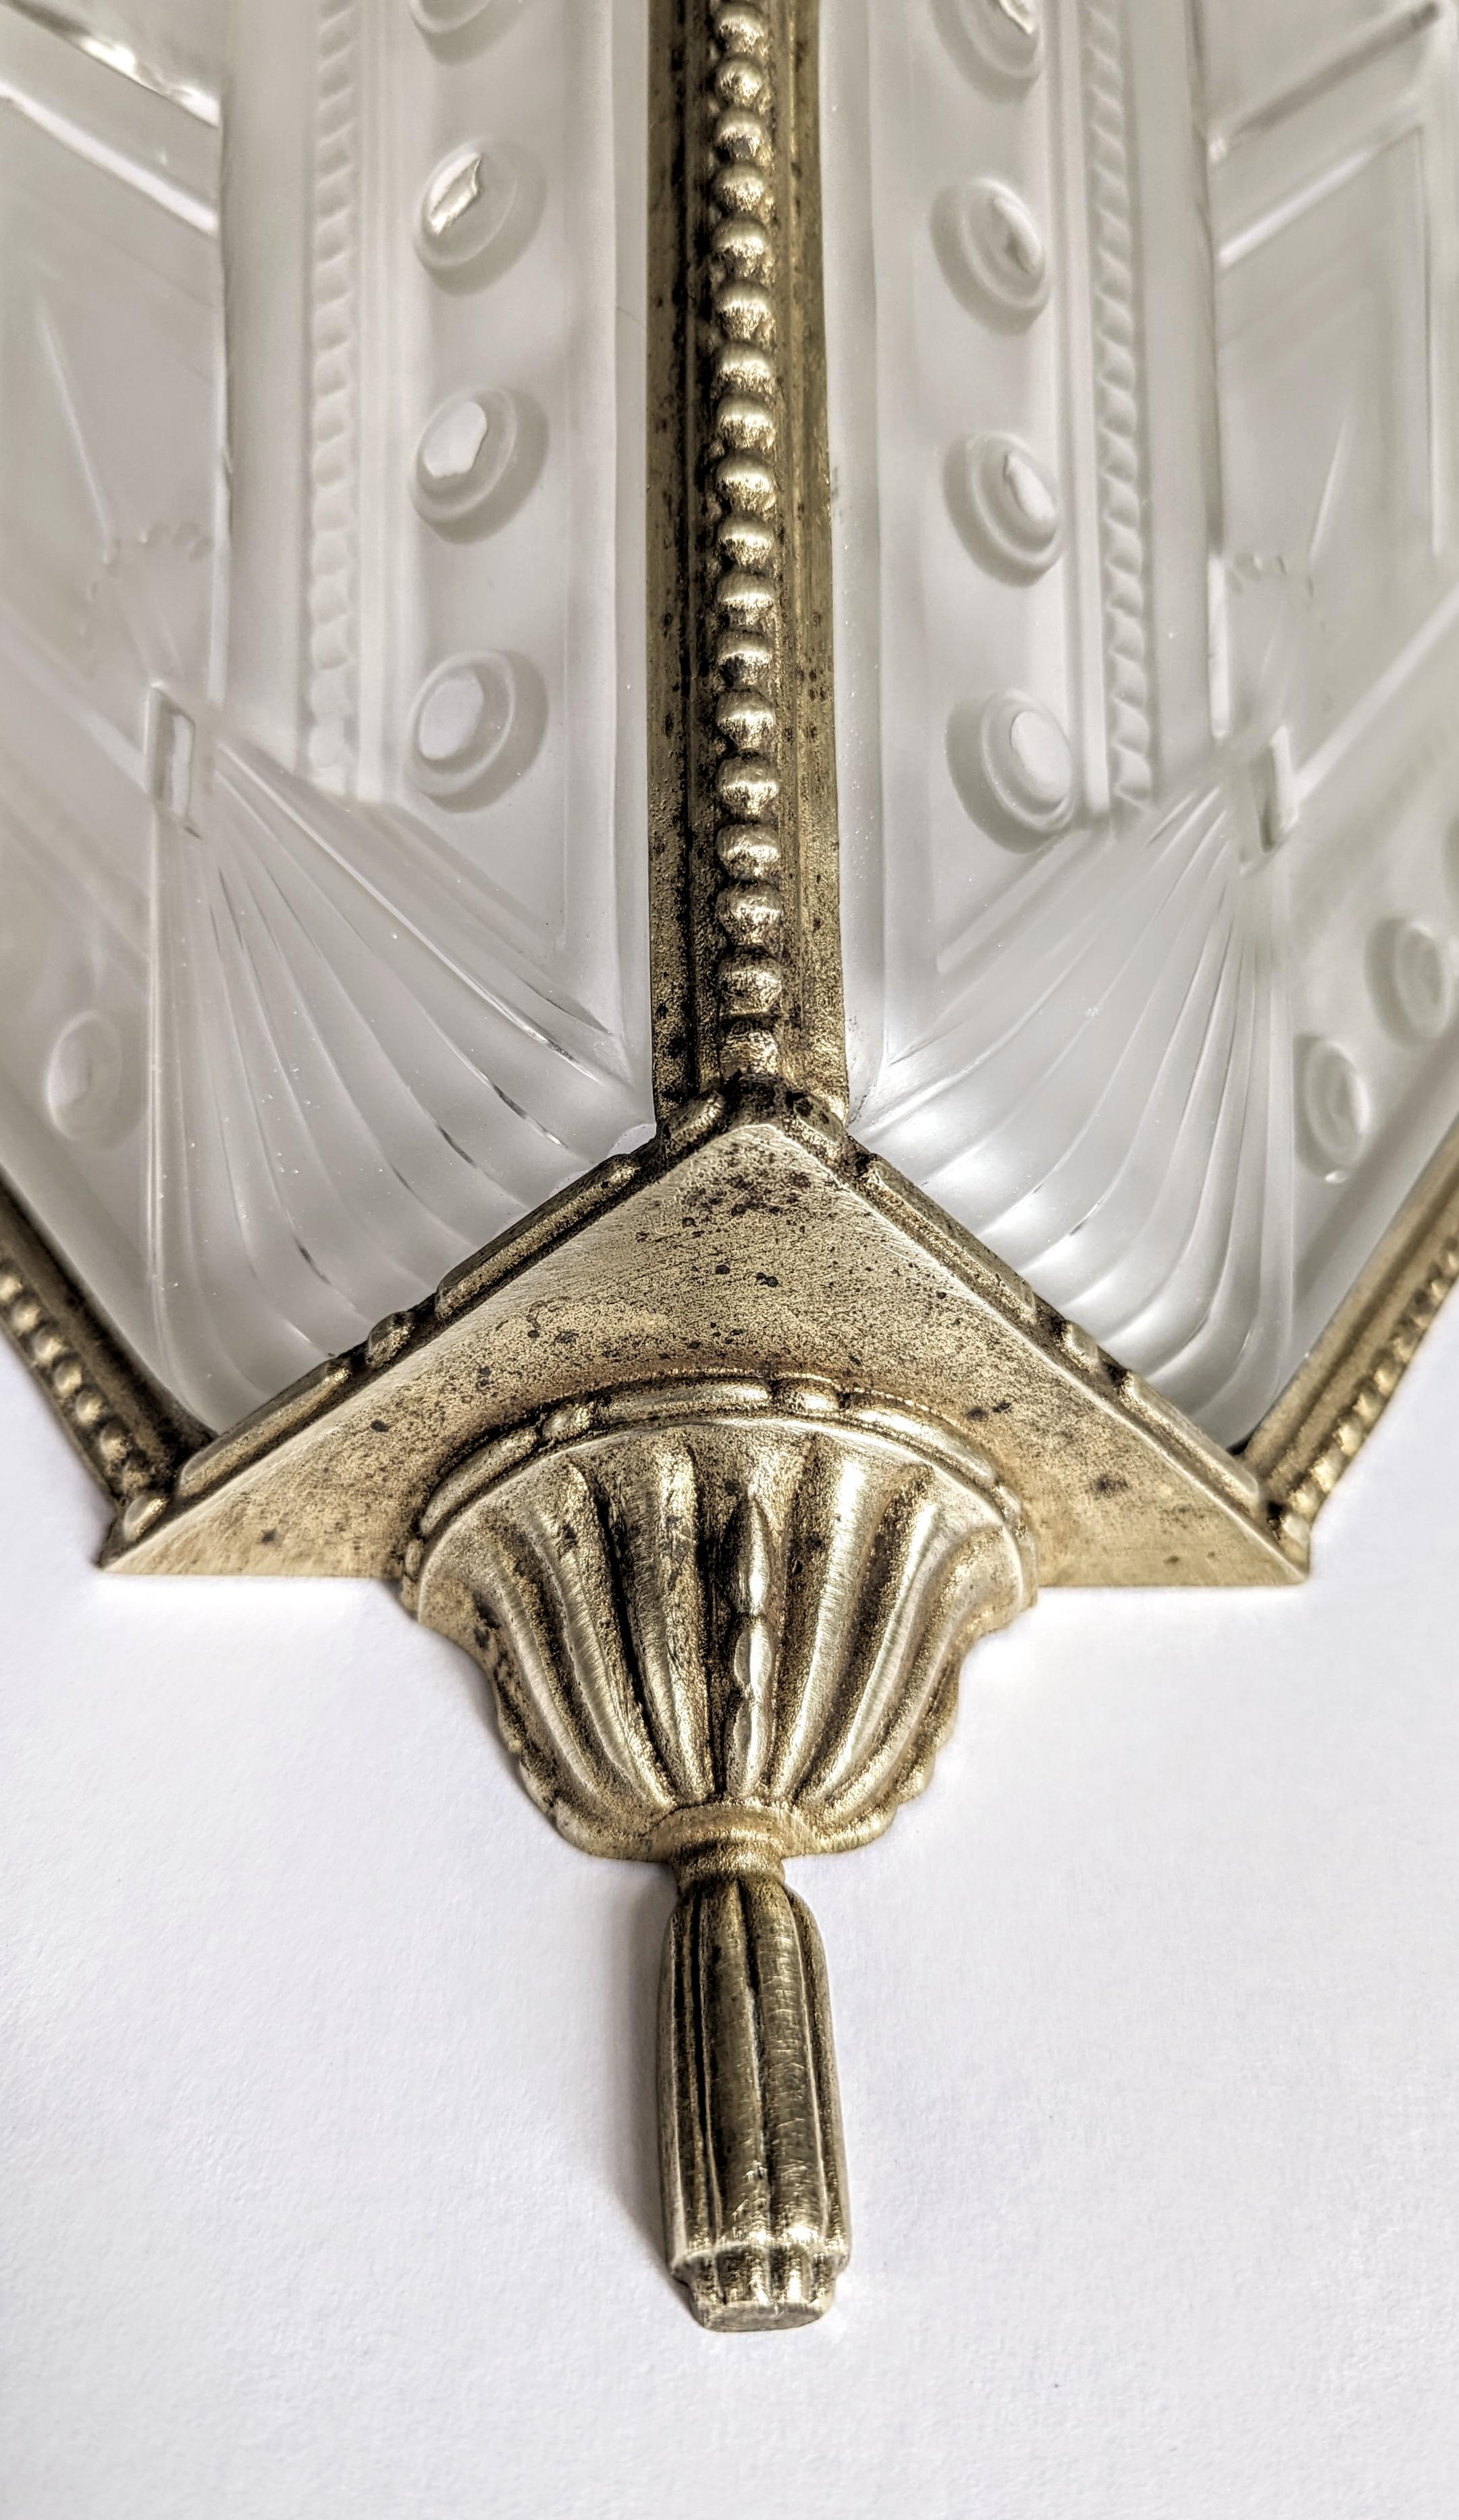 20th Century A Pair of French Art Deco Wall Sconces by “Georges Leleu” For Sale